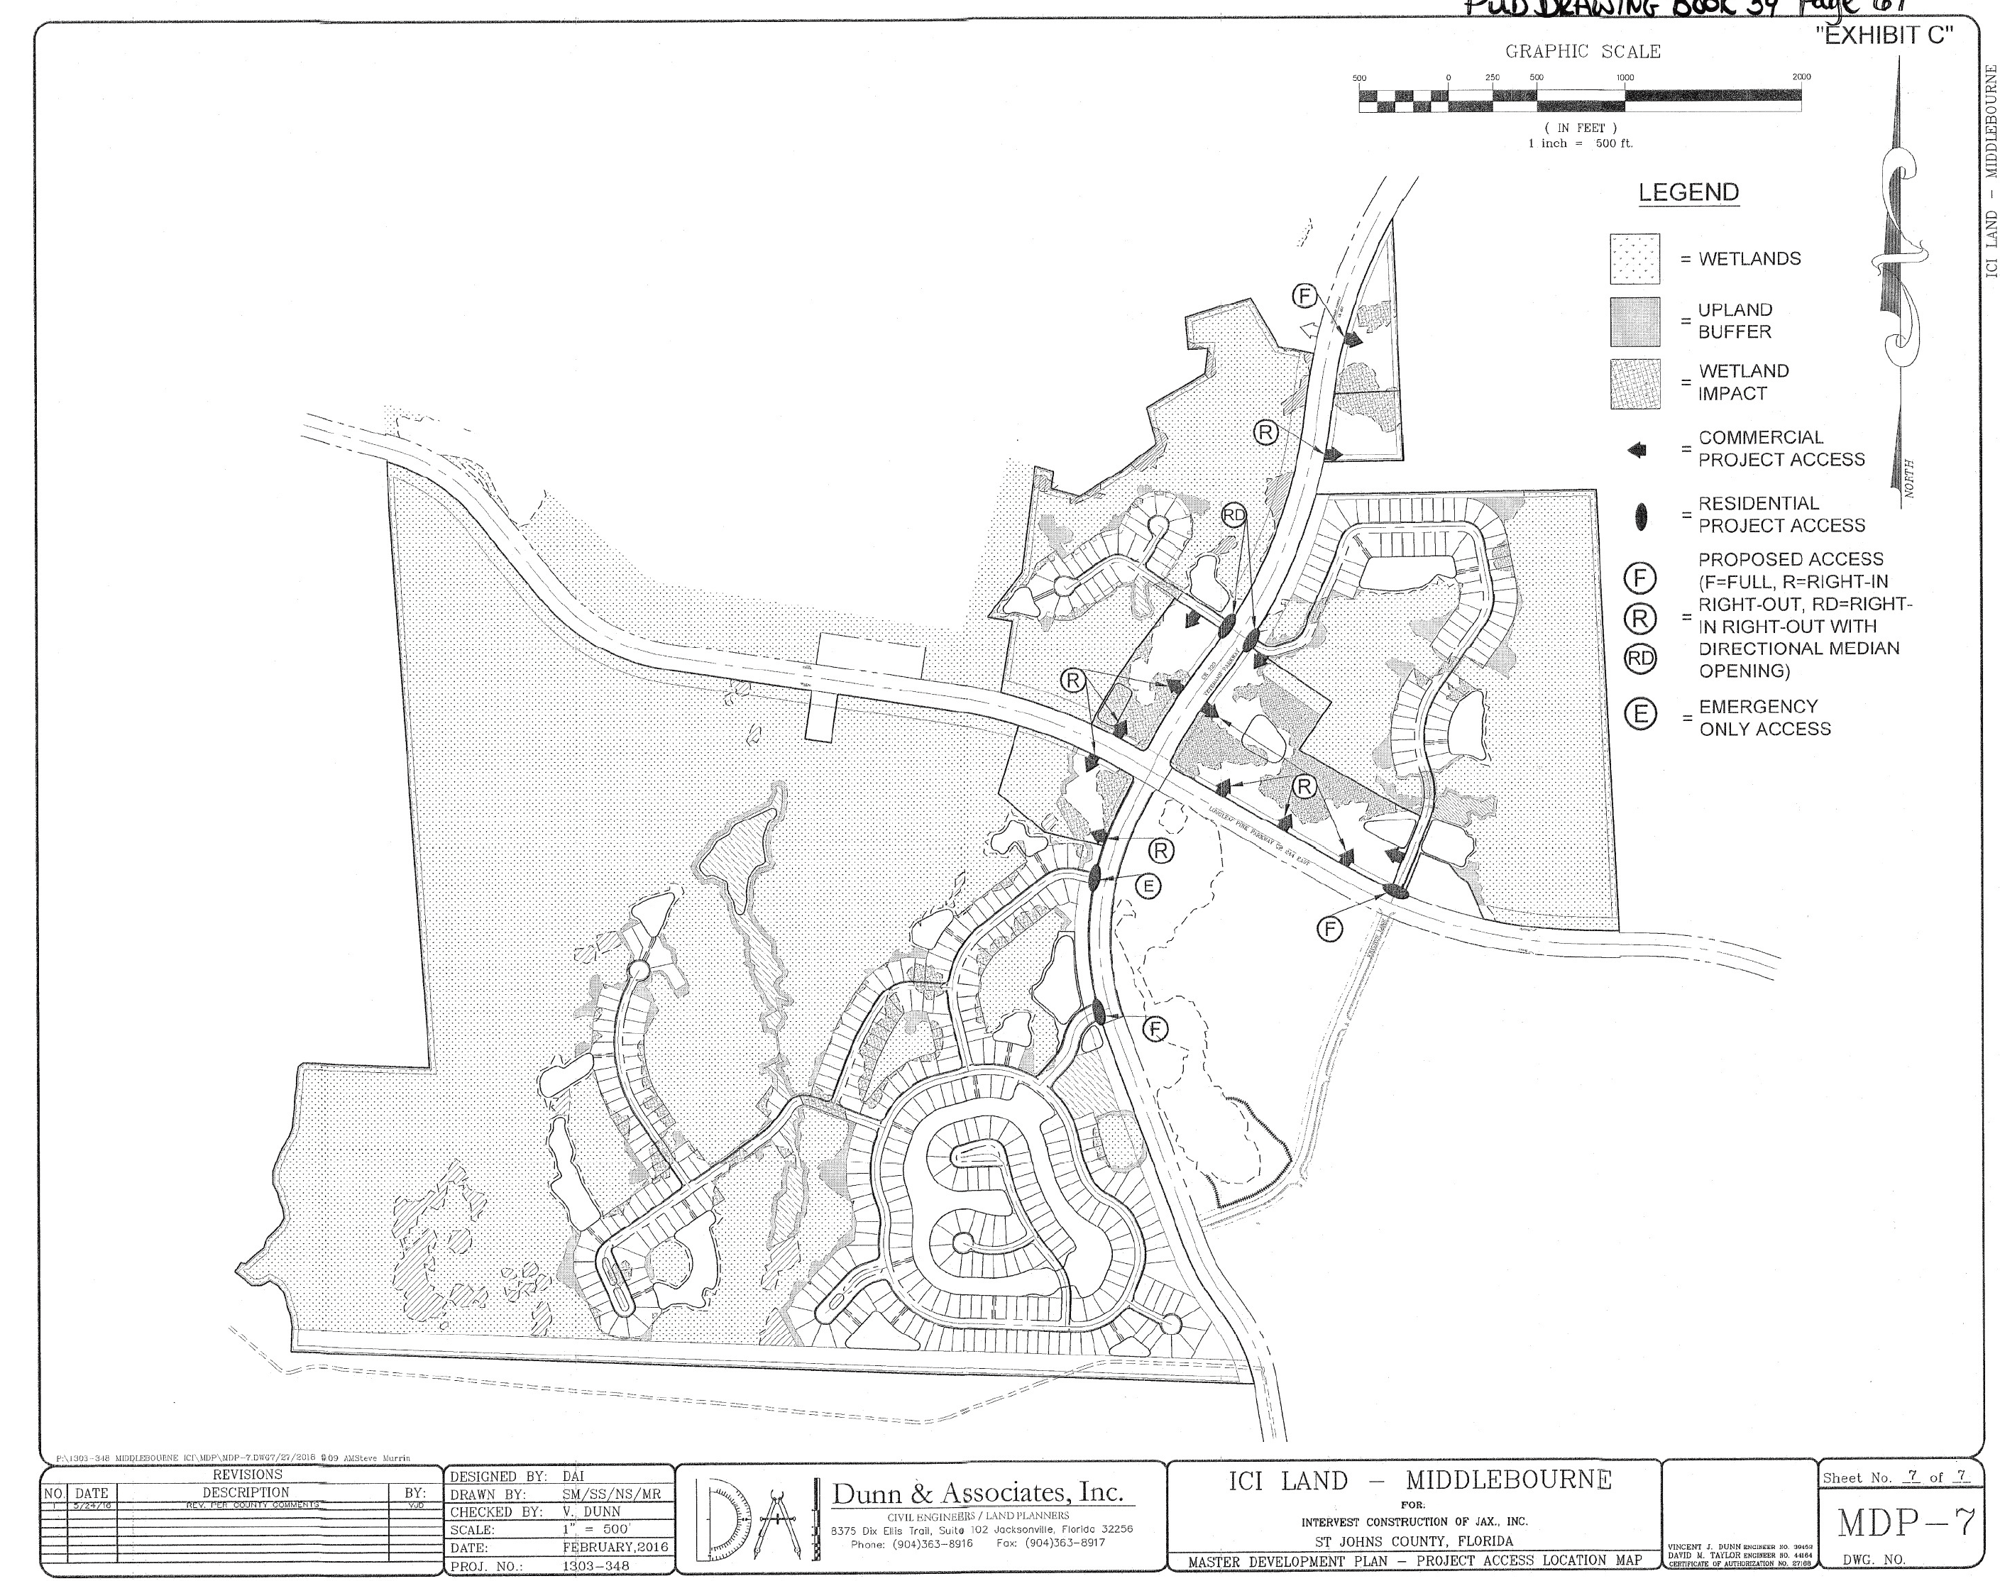 The site plan for the community.